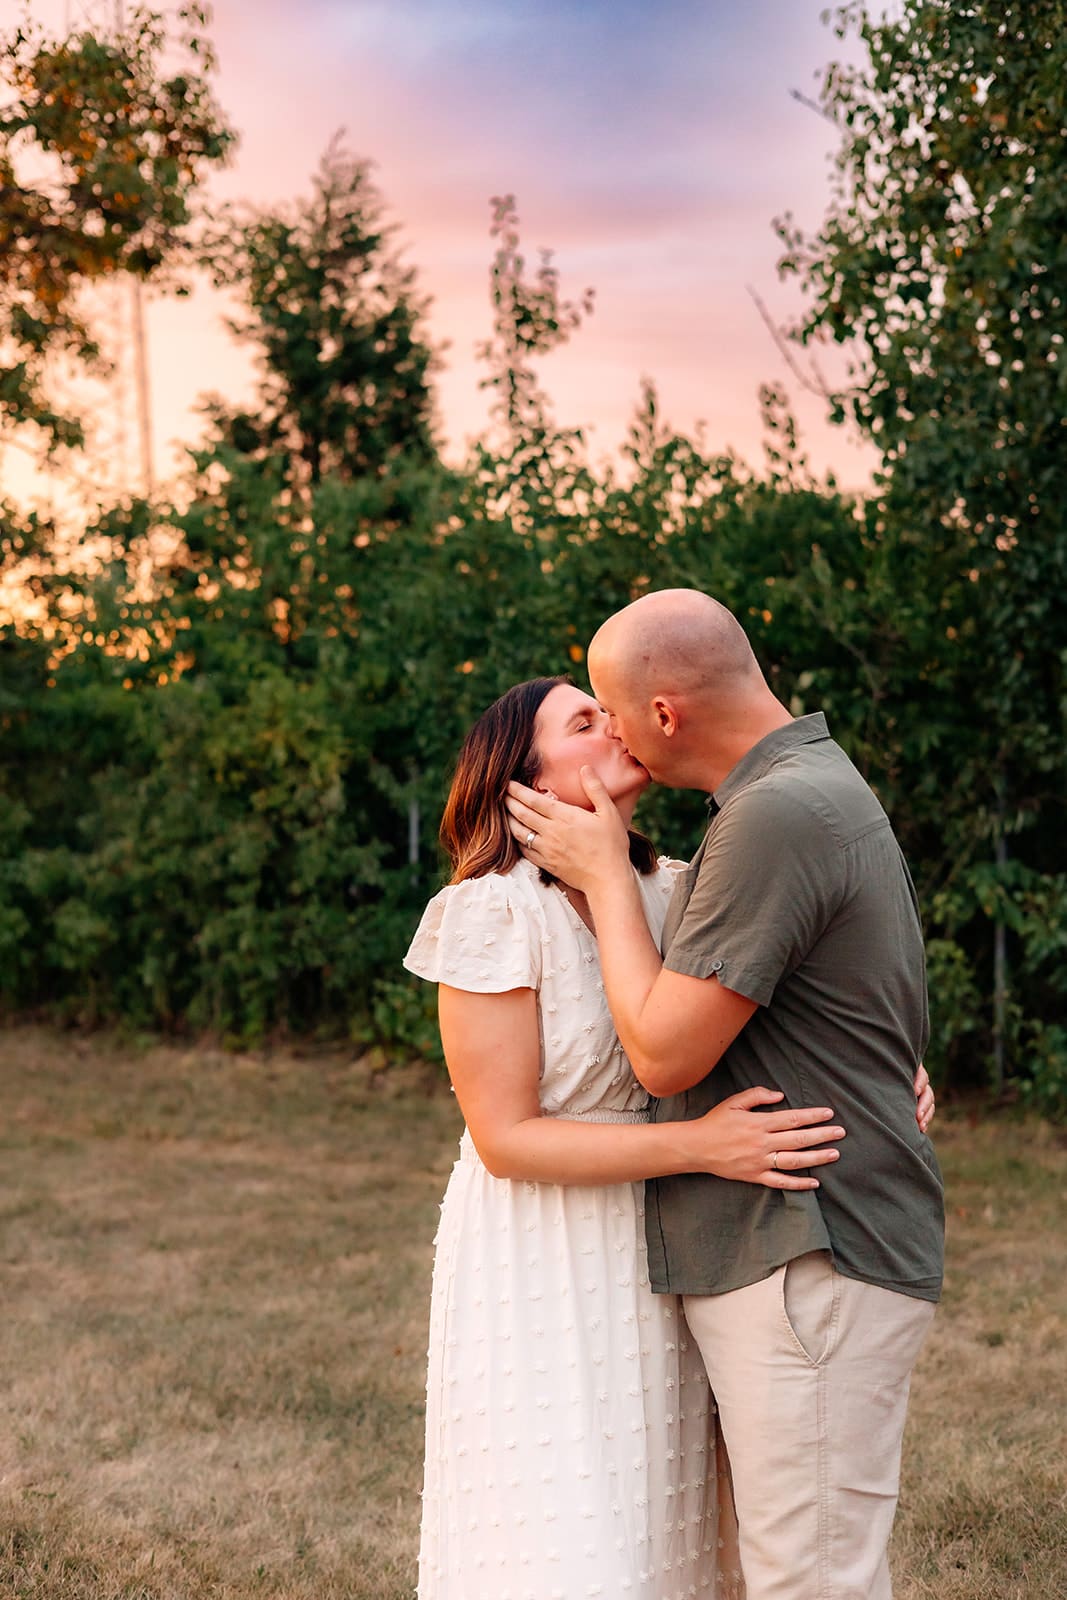 Parents are embracing and kissing, with a backdrop of trees and a twilight sky.